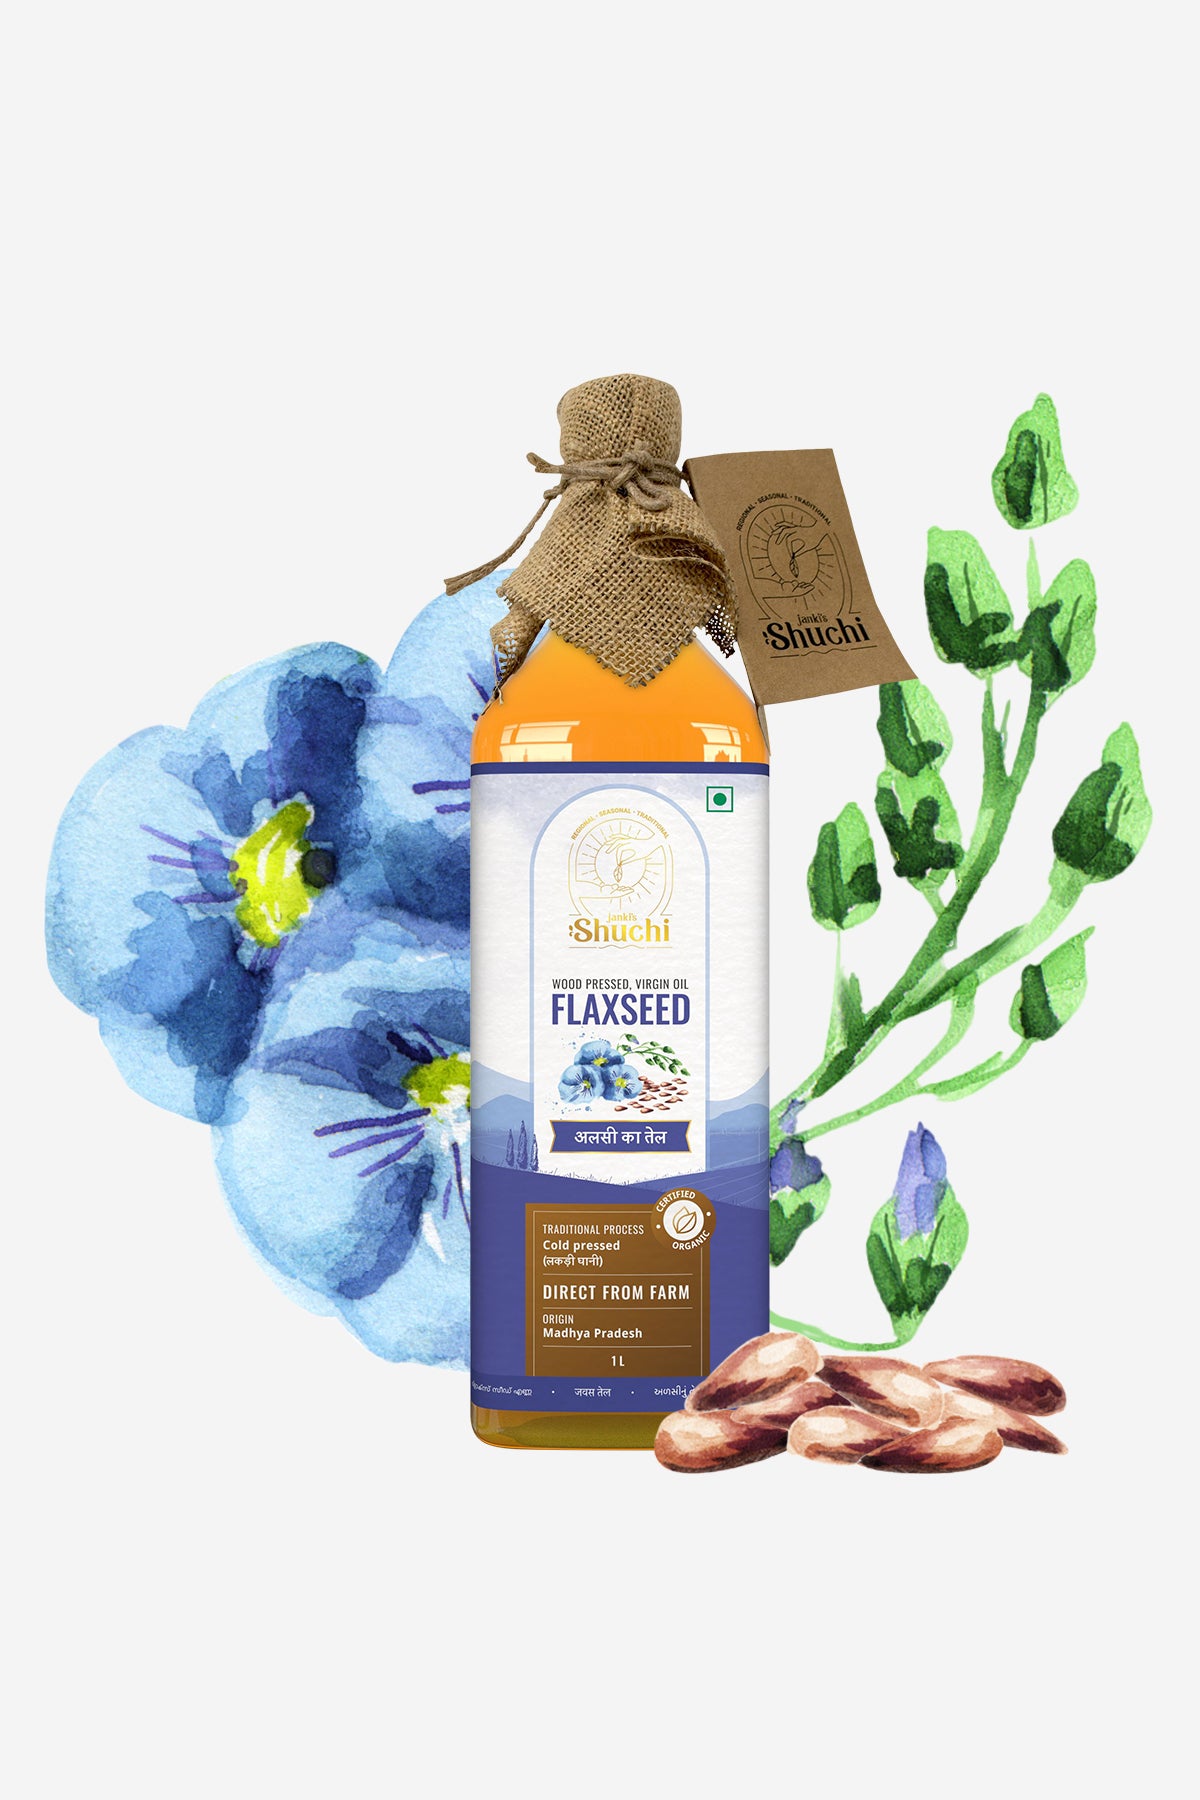 Organic Cold Pressed Flaxseed Oil